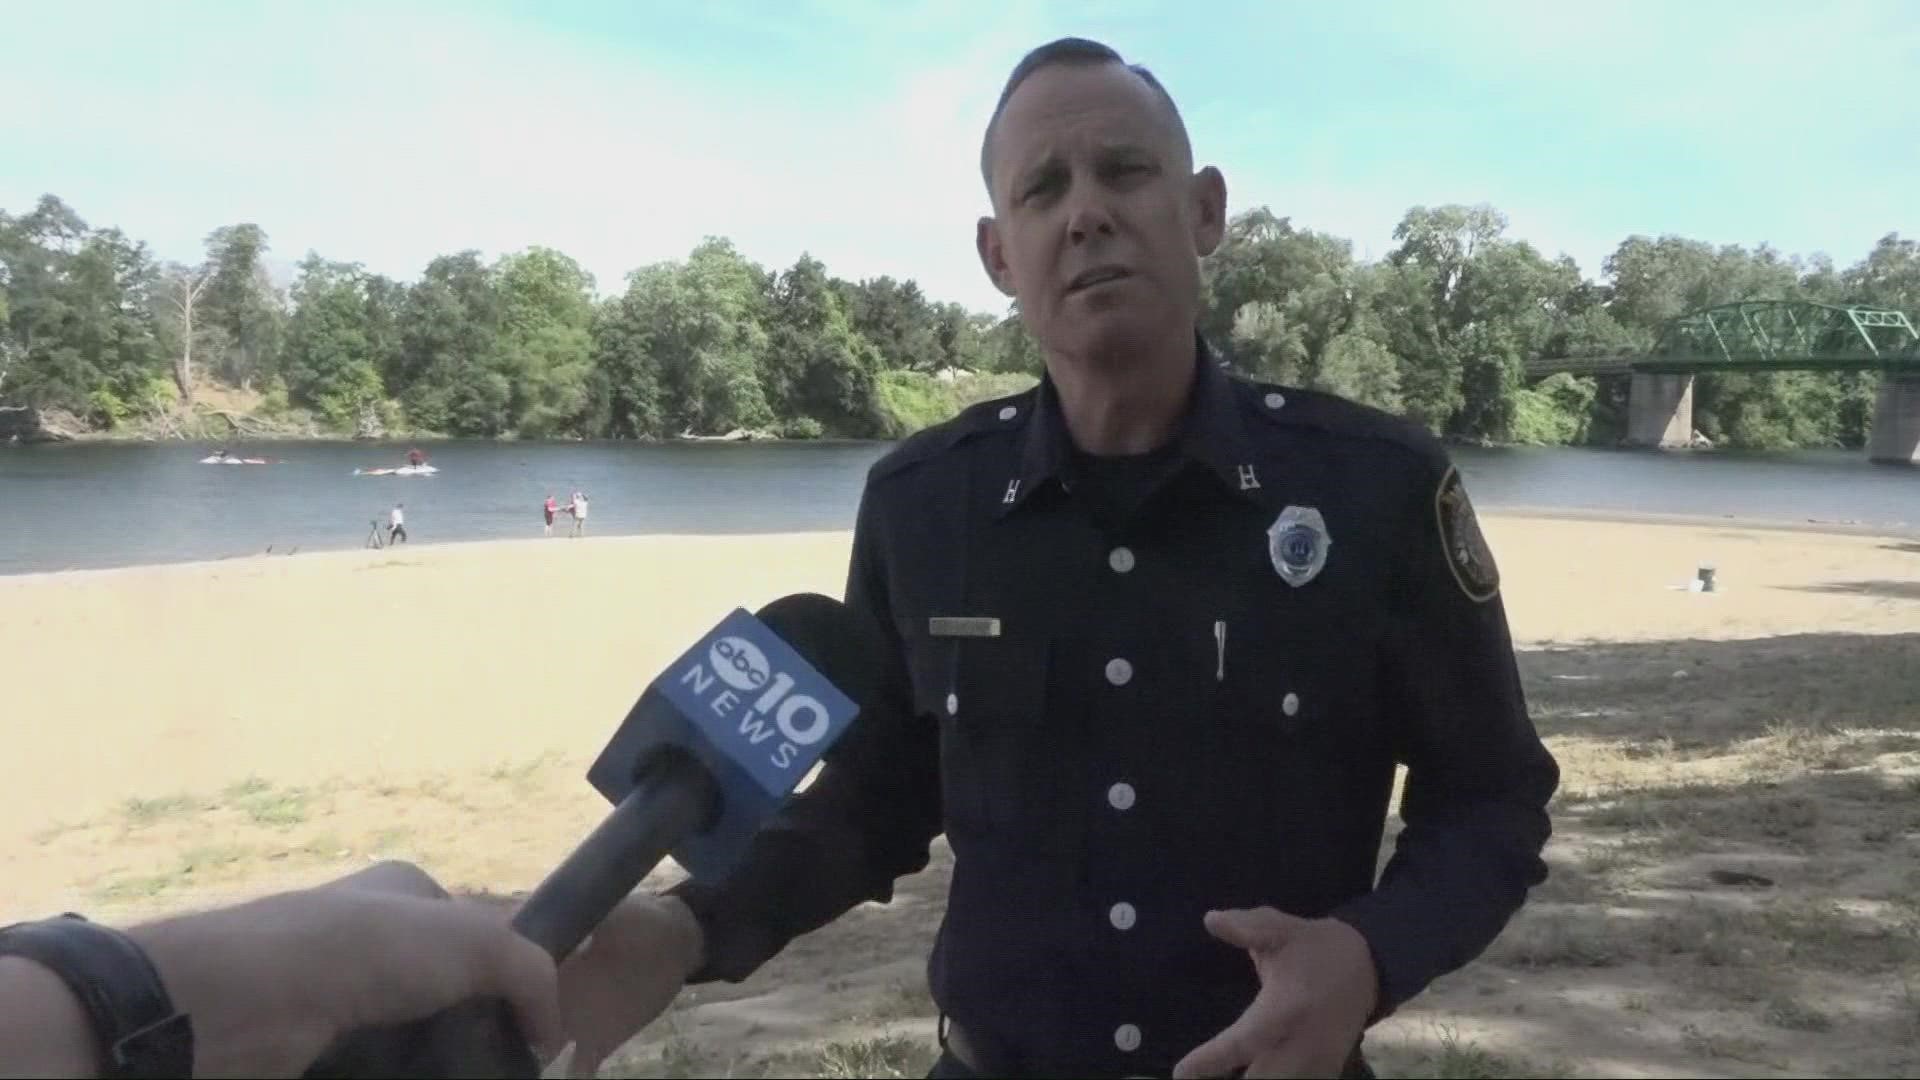 With Memorial Day coming up Sacramento Fire provides life-saving tips on how to stay safe during weekend water activities.